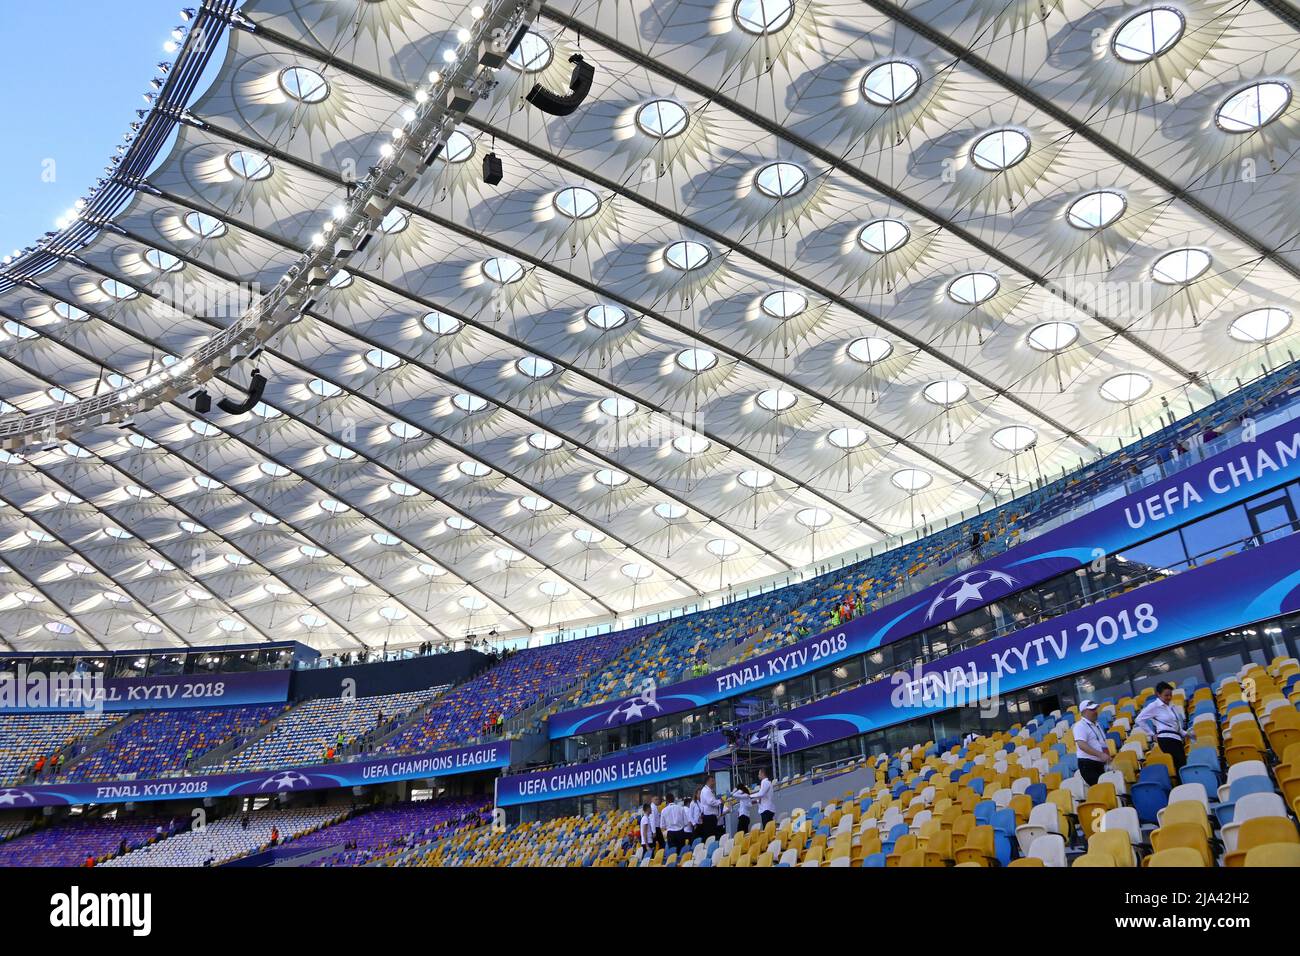 In pictures: The venue for the 2018 Champions League final